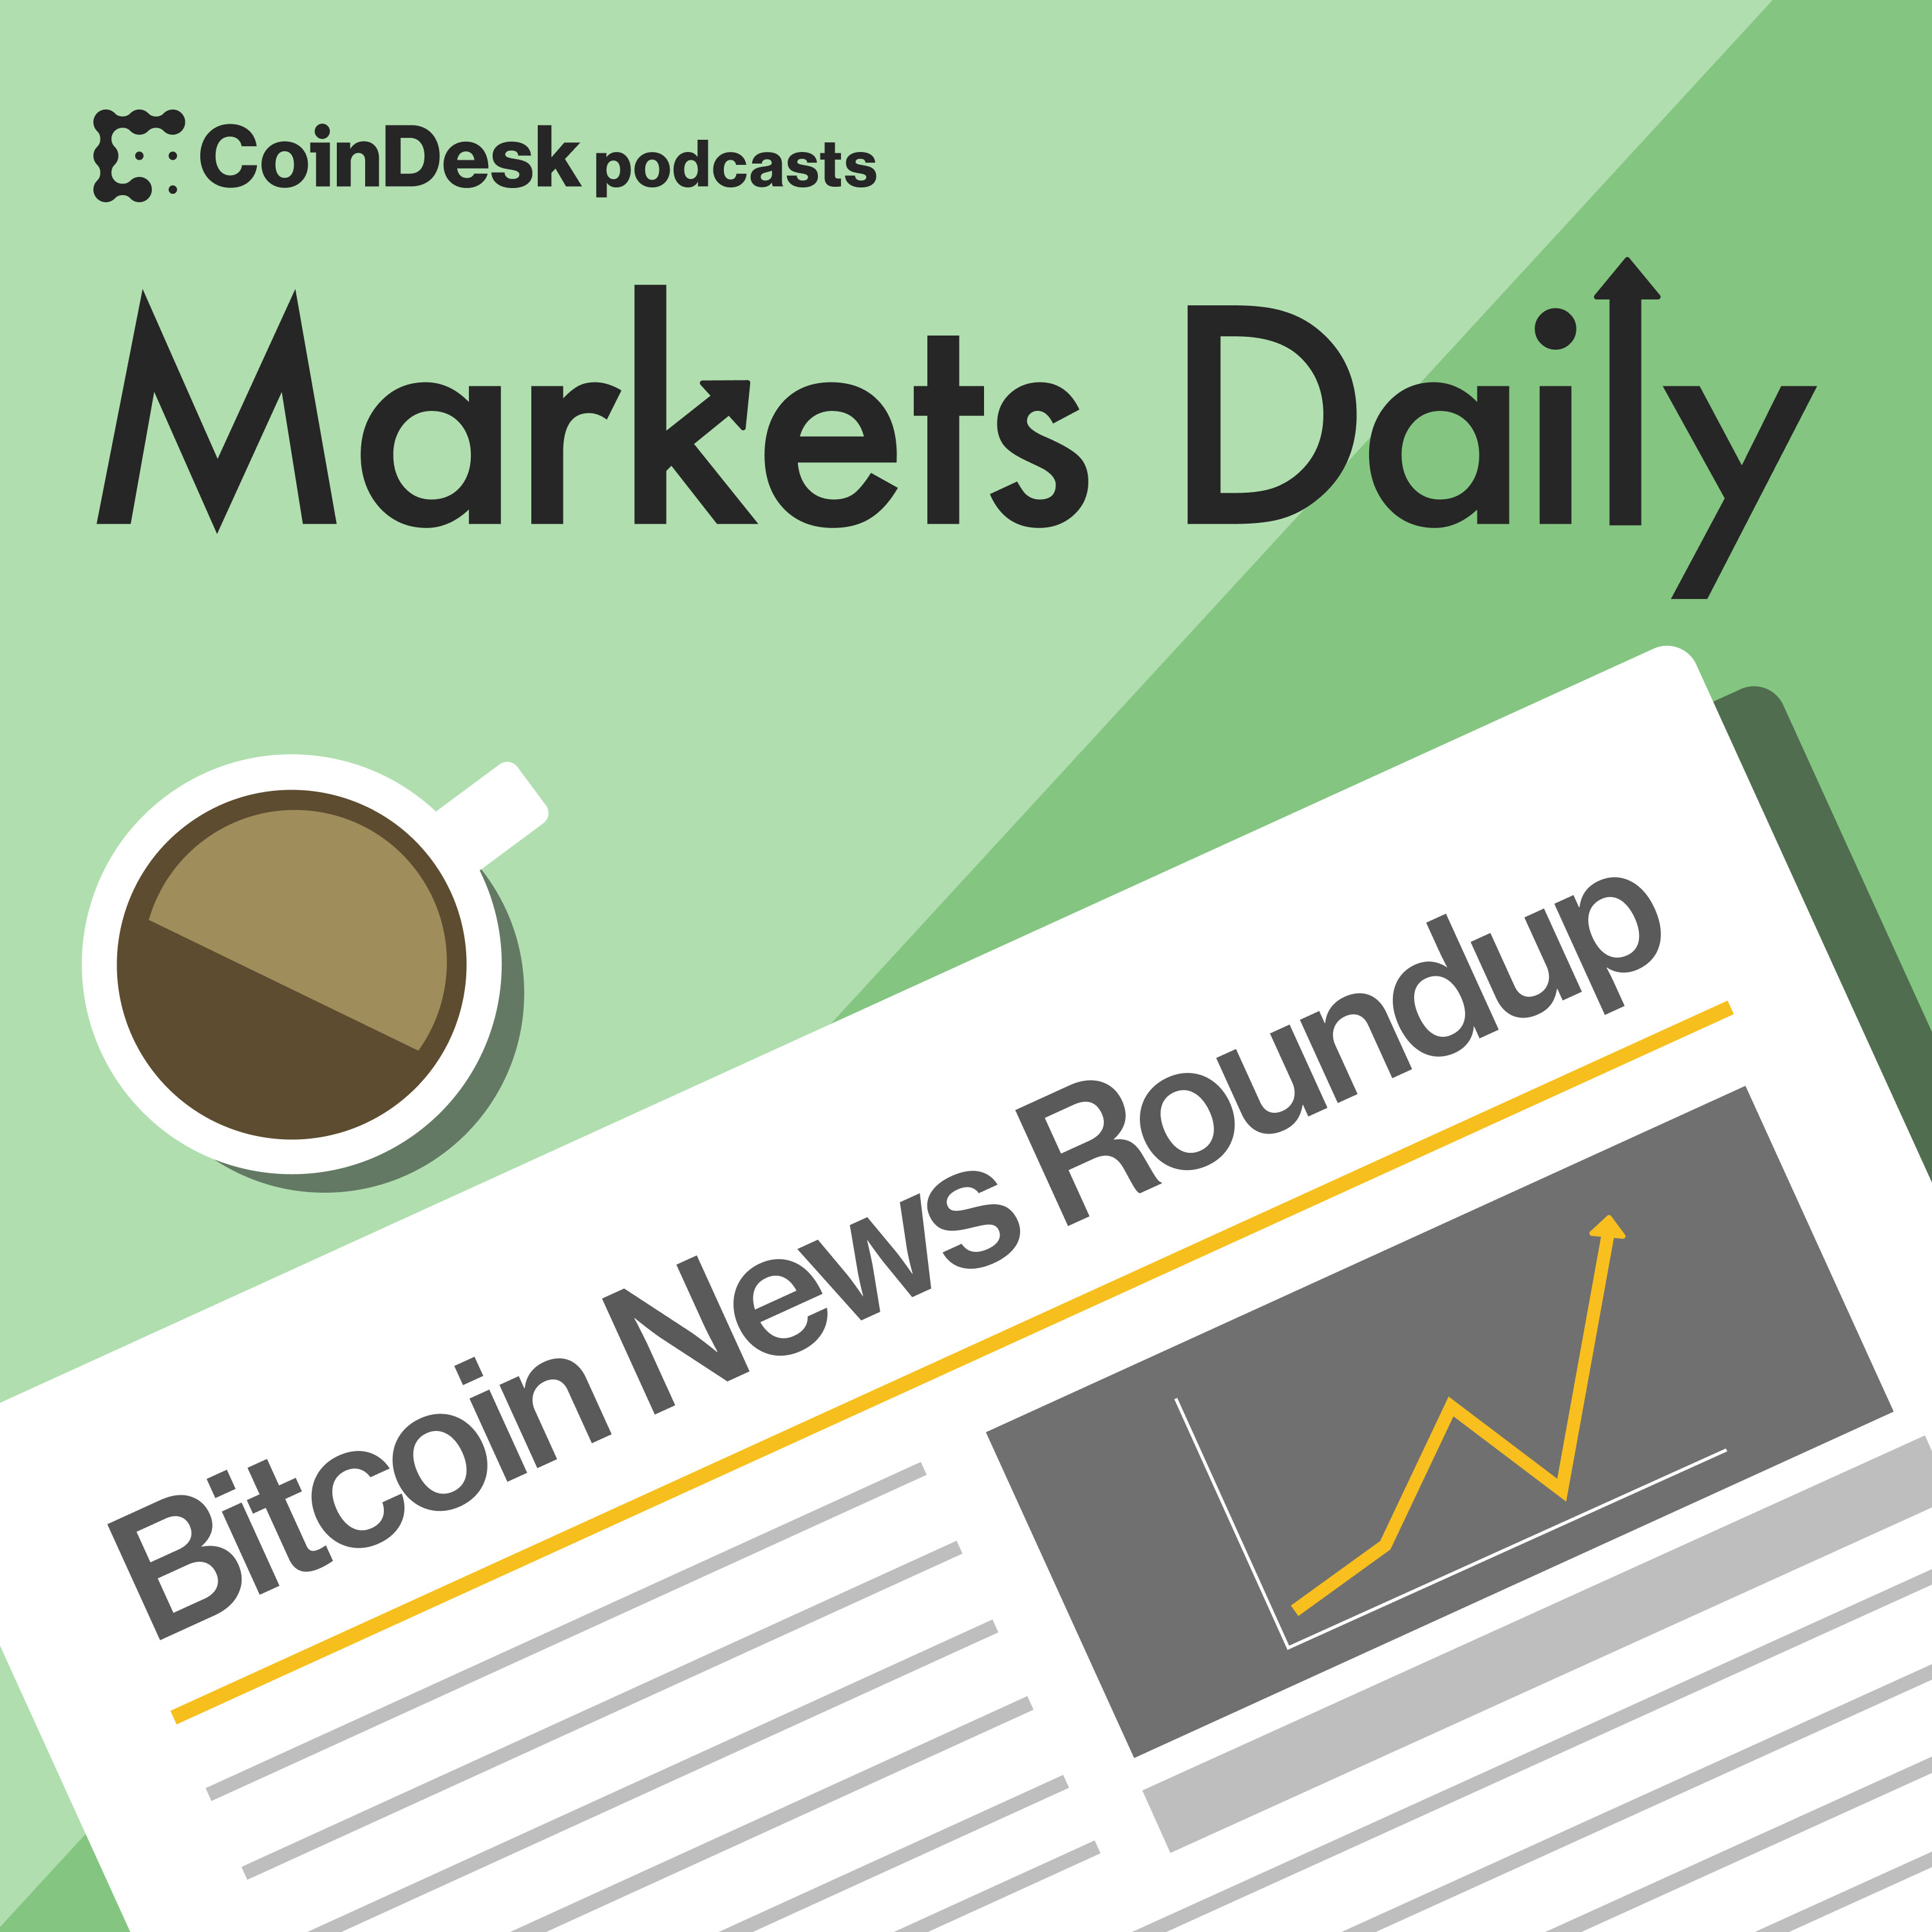 MARKETS DAILY: Crypto Update | Bitcoin's Narrative 'Never Better': ZX Squared Capital Co-Founder